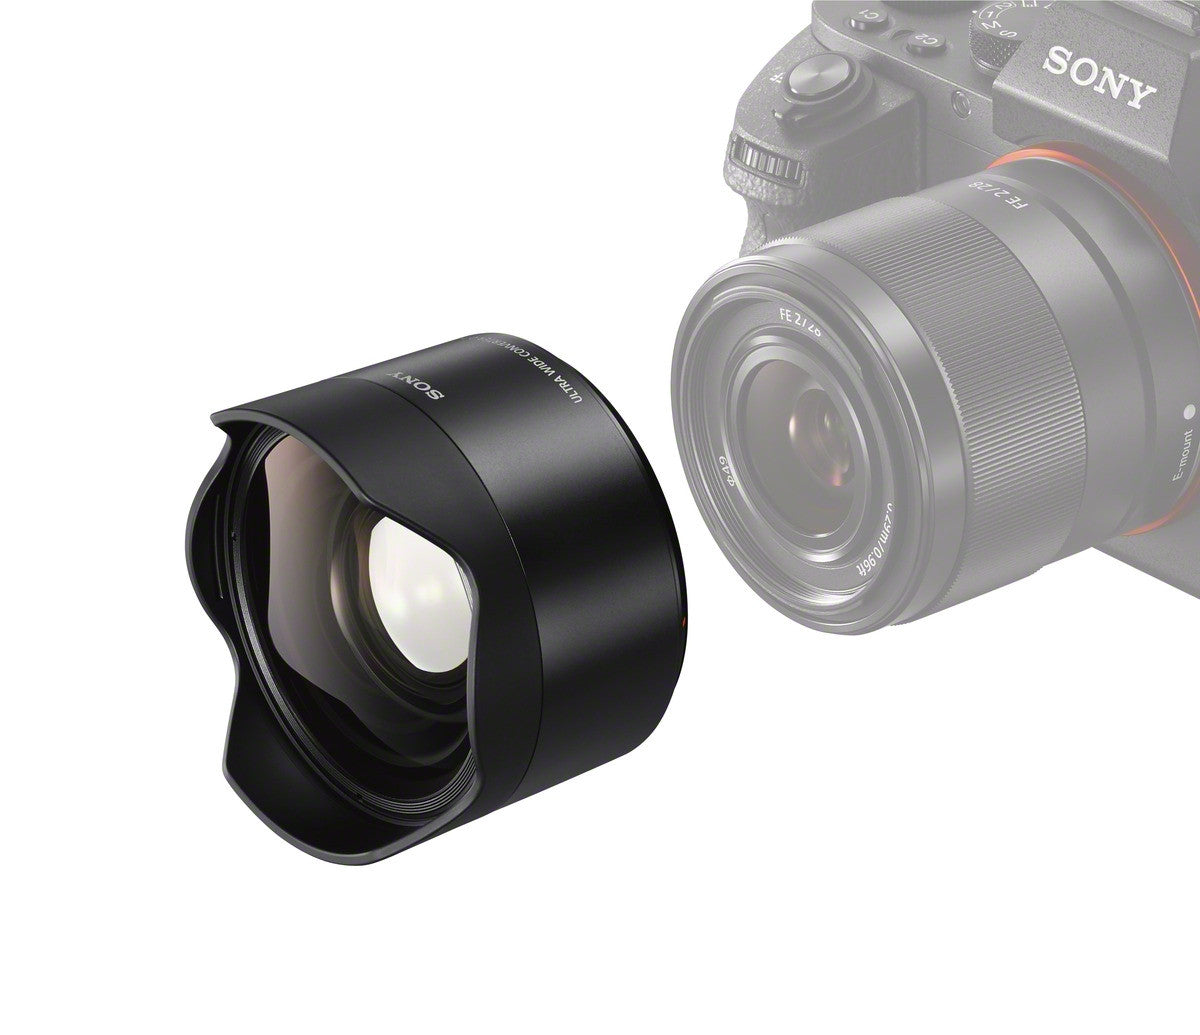 Sony 21mm Ultra Wide Converter for 28mm f2, lenses optics & accessories, Sony - Pictureline  - 3